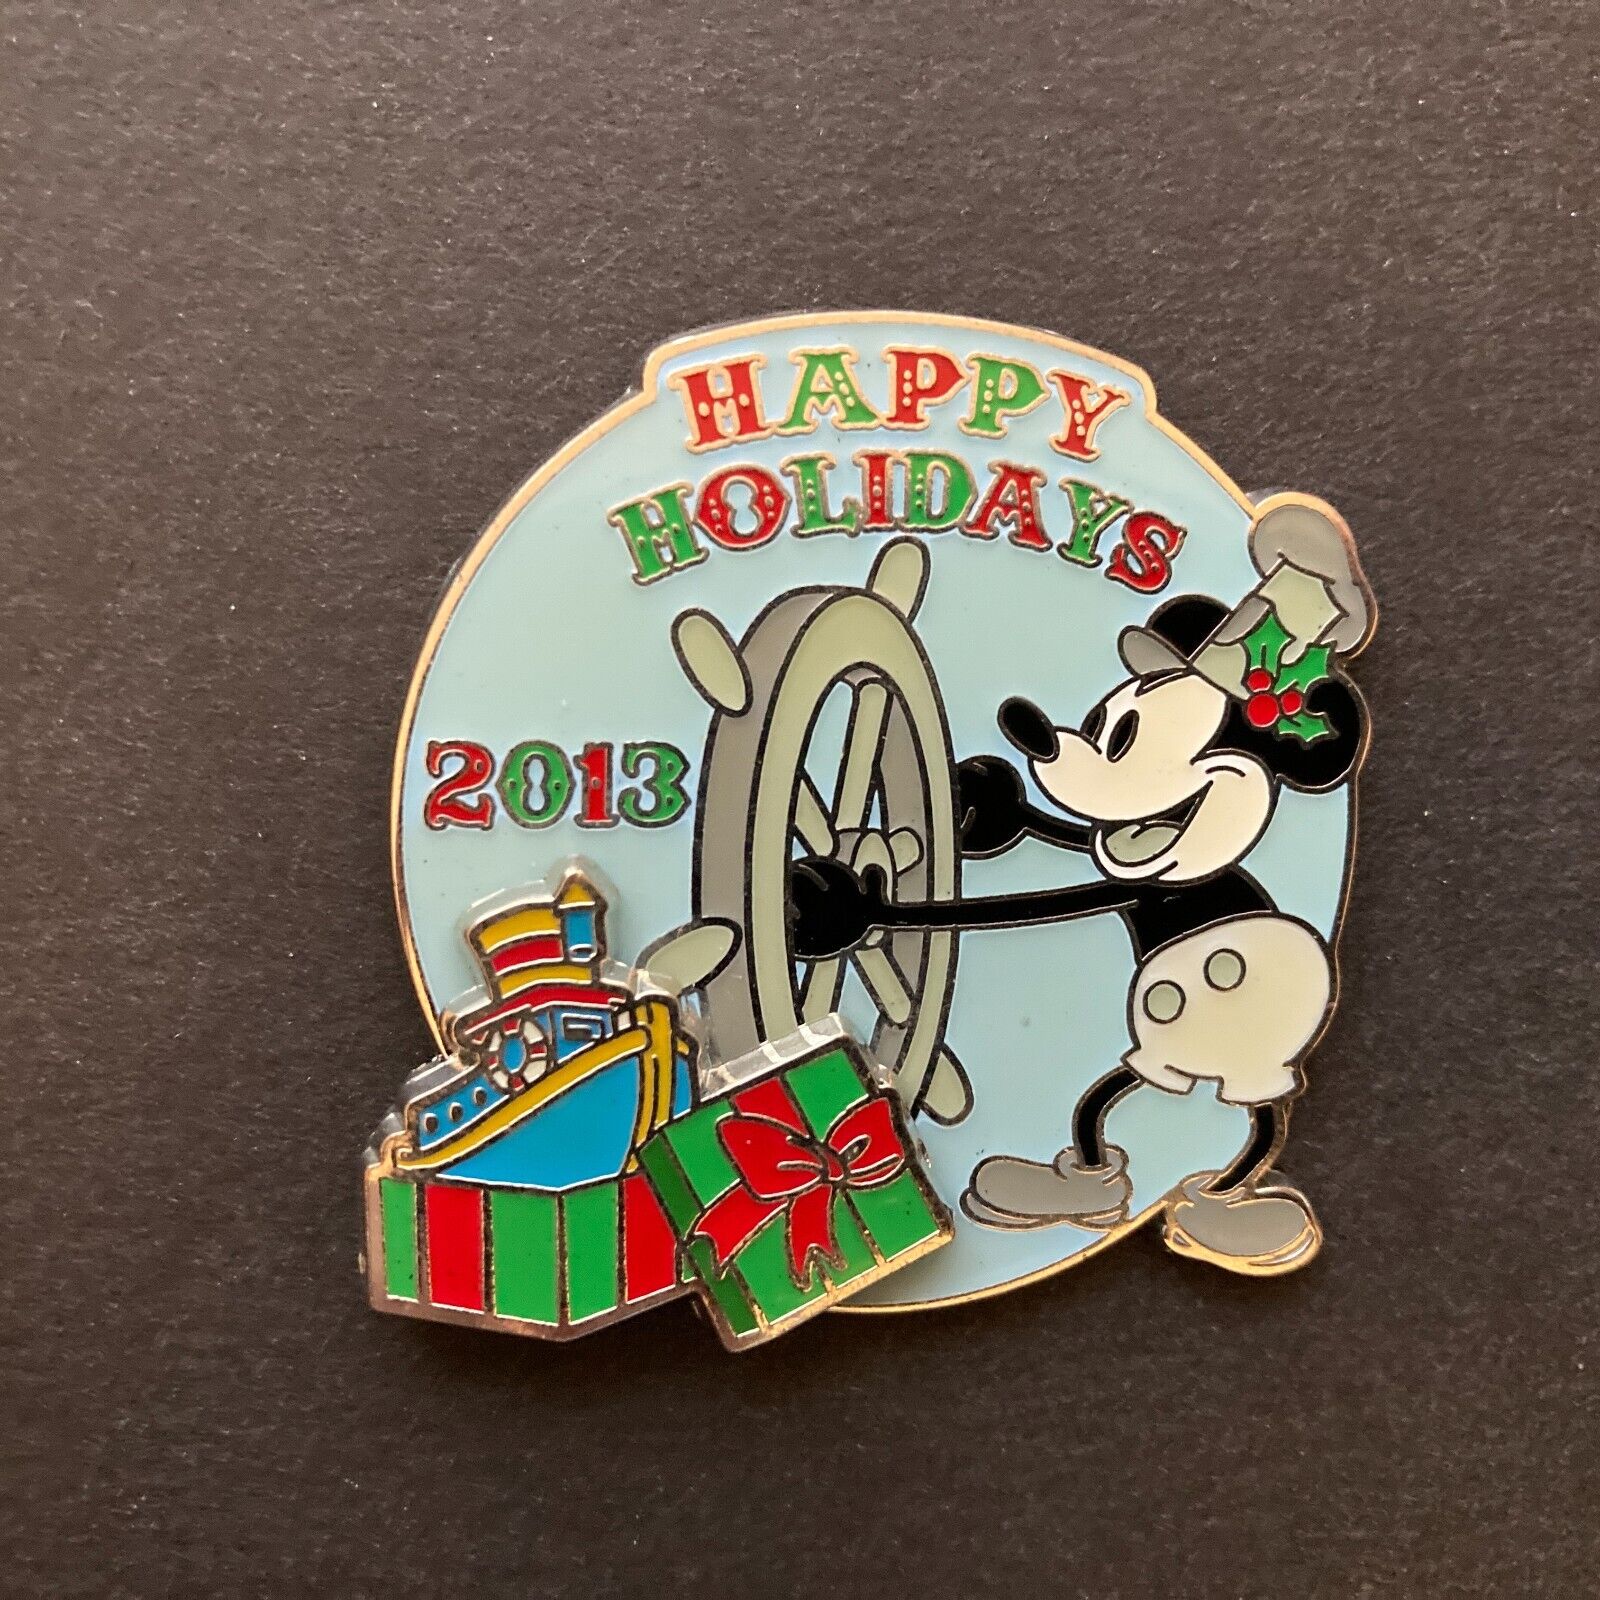 Cast Member Happy Holidays 2013 Steamboat Willie Artist Proof Disney Pin 99181